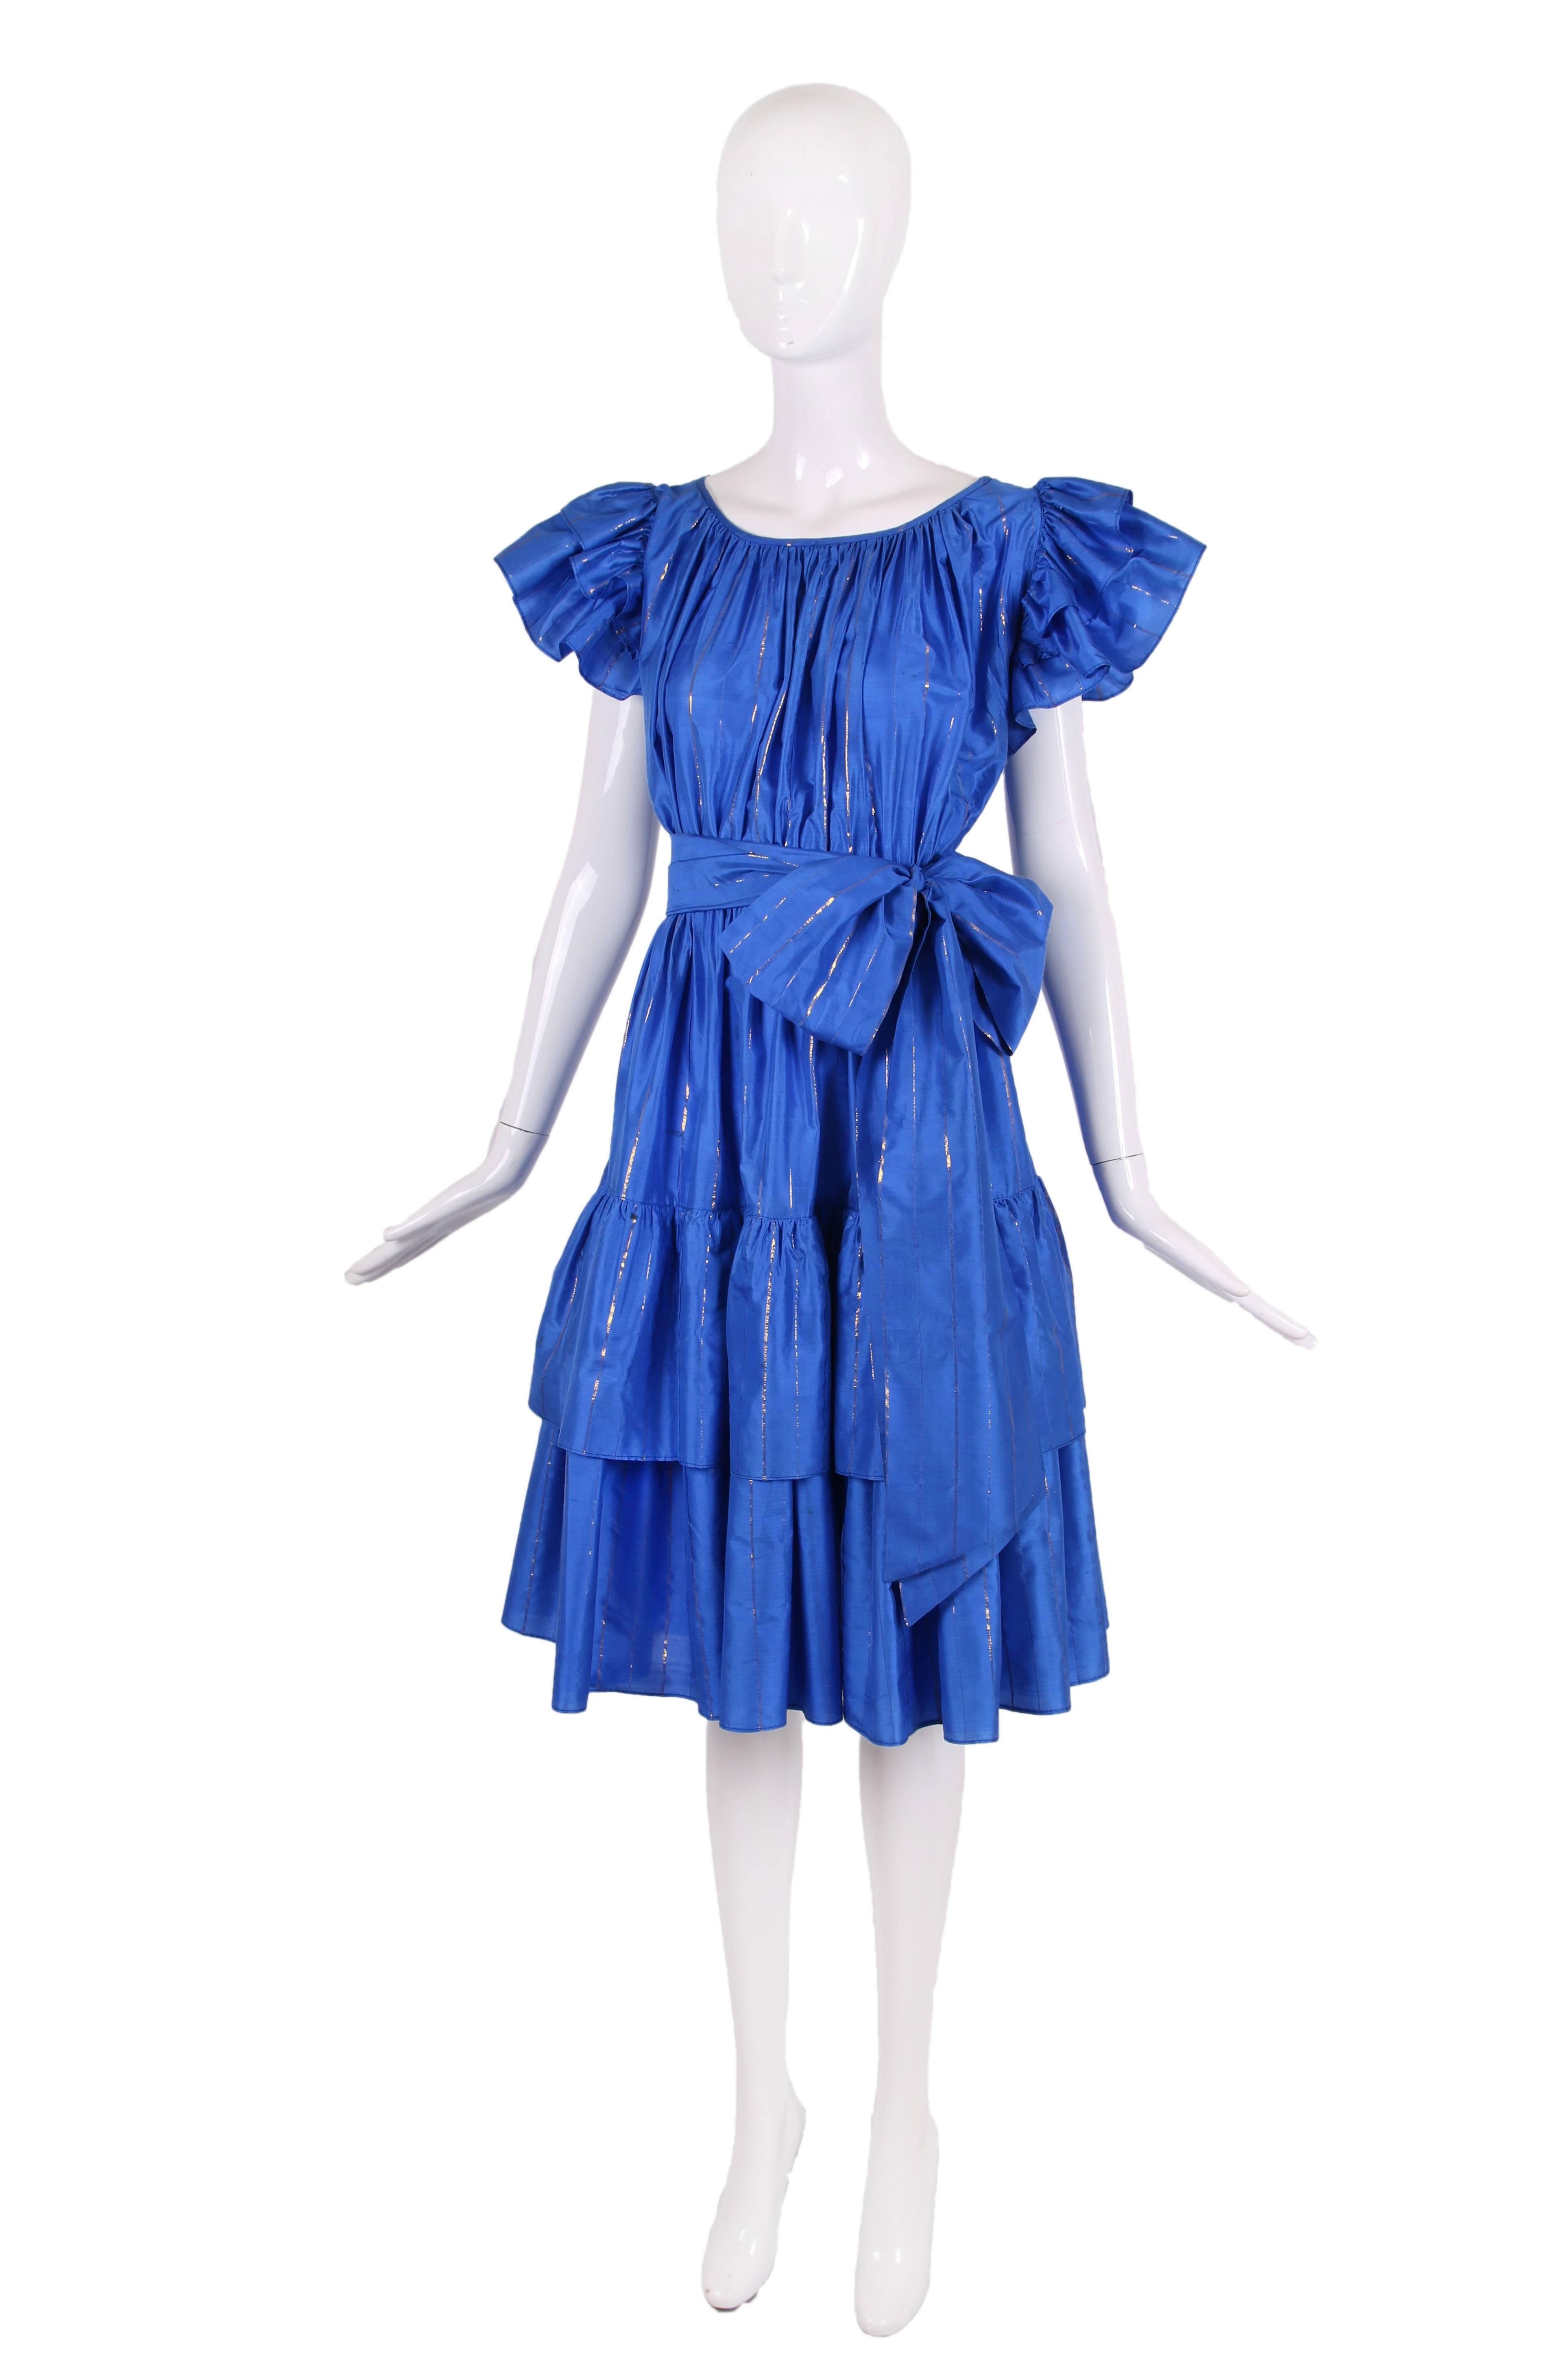 Vintage Yves Saint Laurent silk party dress in cobalt blue silk w/gold-ish metallic stripes. Features ruffled short sleeves and a tiered skirt. Comes with long self sash. In overall excellent condition with several very hard to see, small dark marks